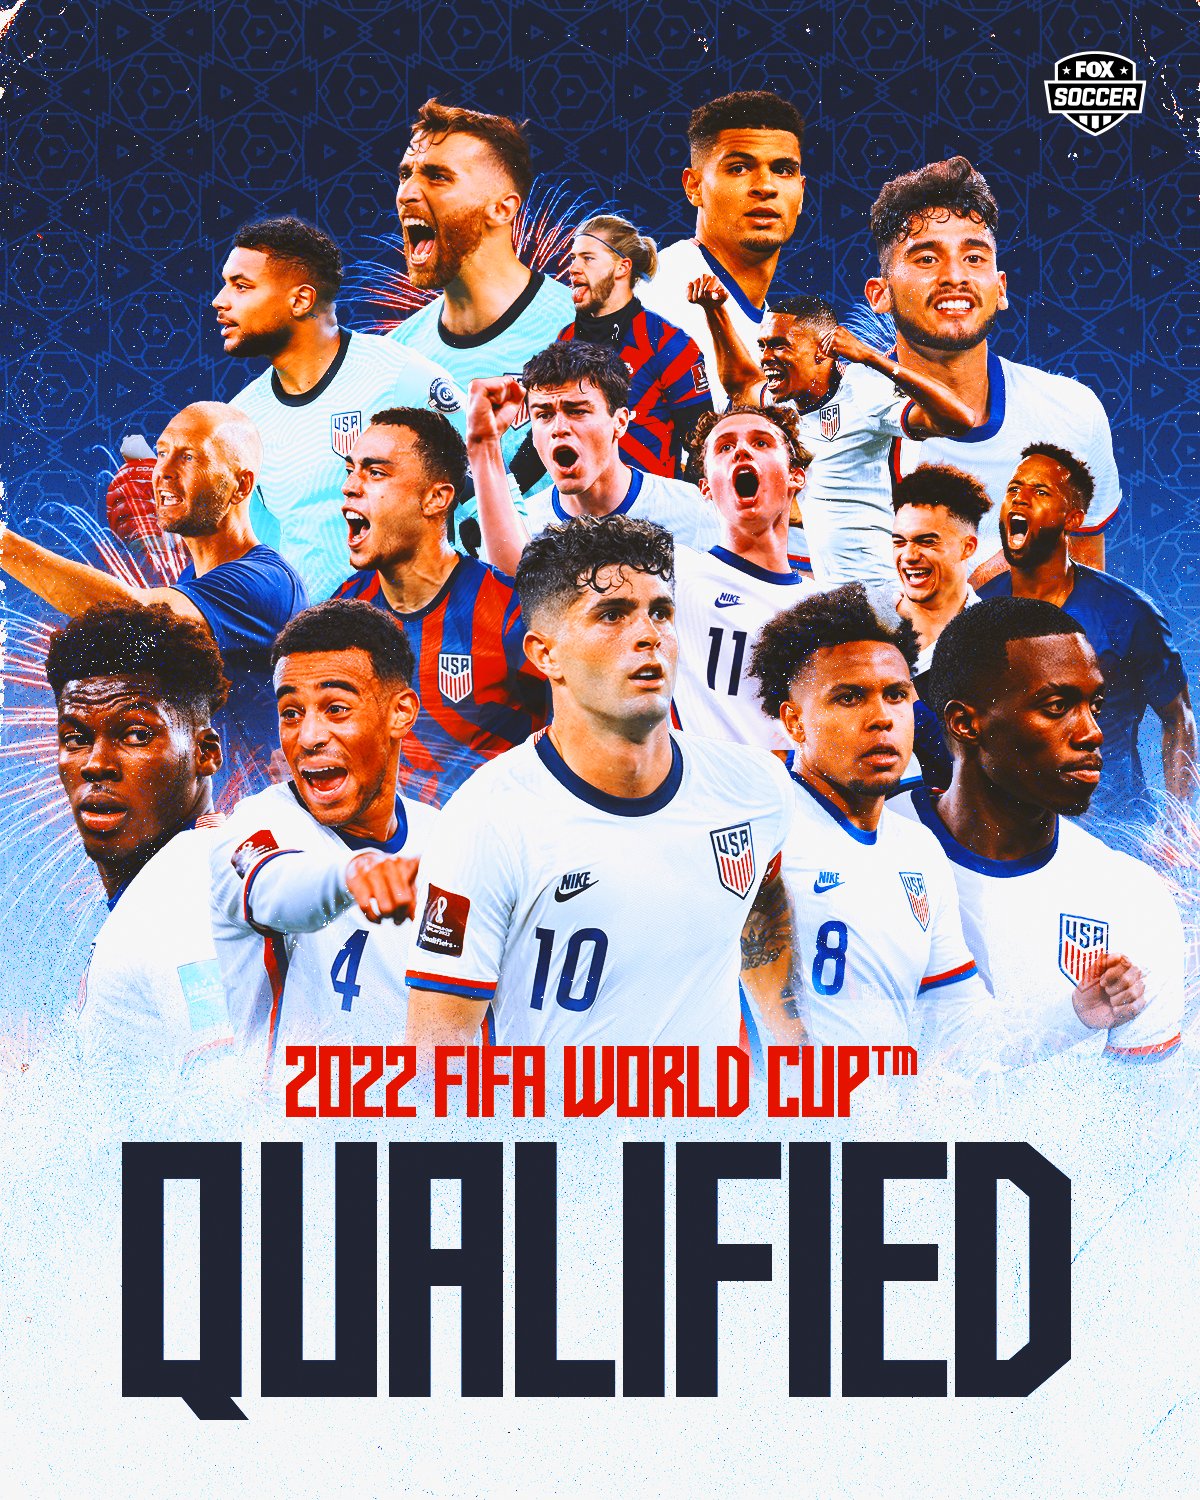 FIFA World Cup 2022 teams: Know who has qualified